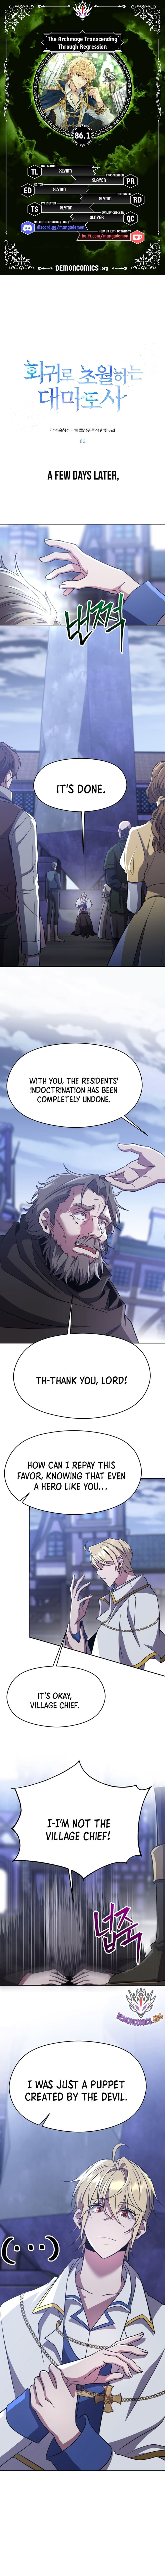 Archmage Transcending Through Regression Chapter 86.1 page 1